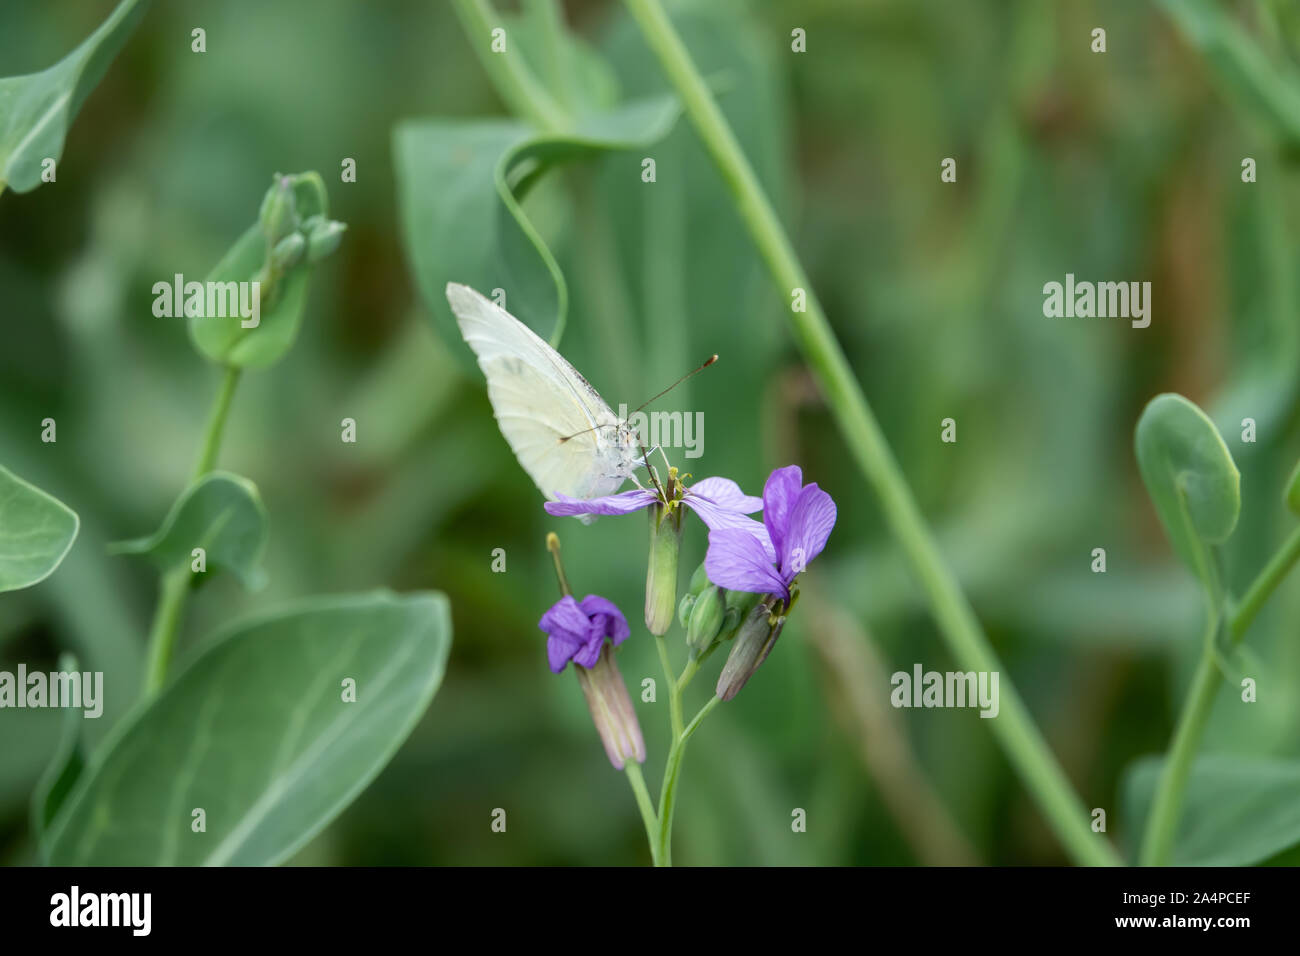 Cabbage White Butterfly on Violet Cabbage Flower Stock Photo